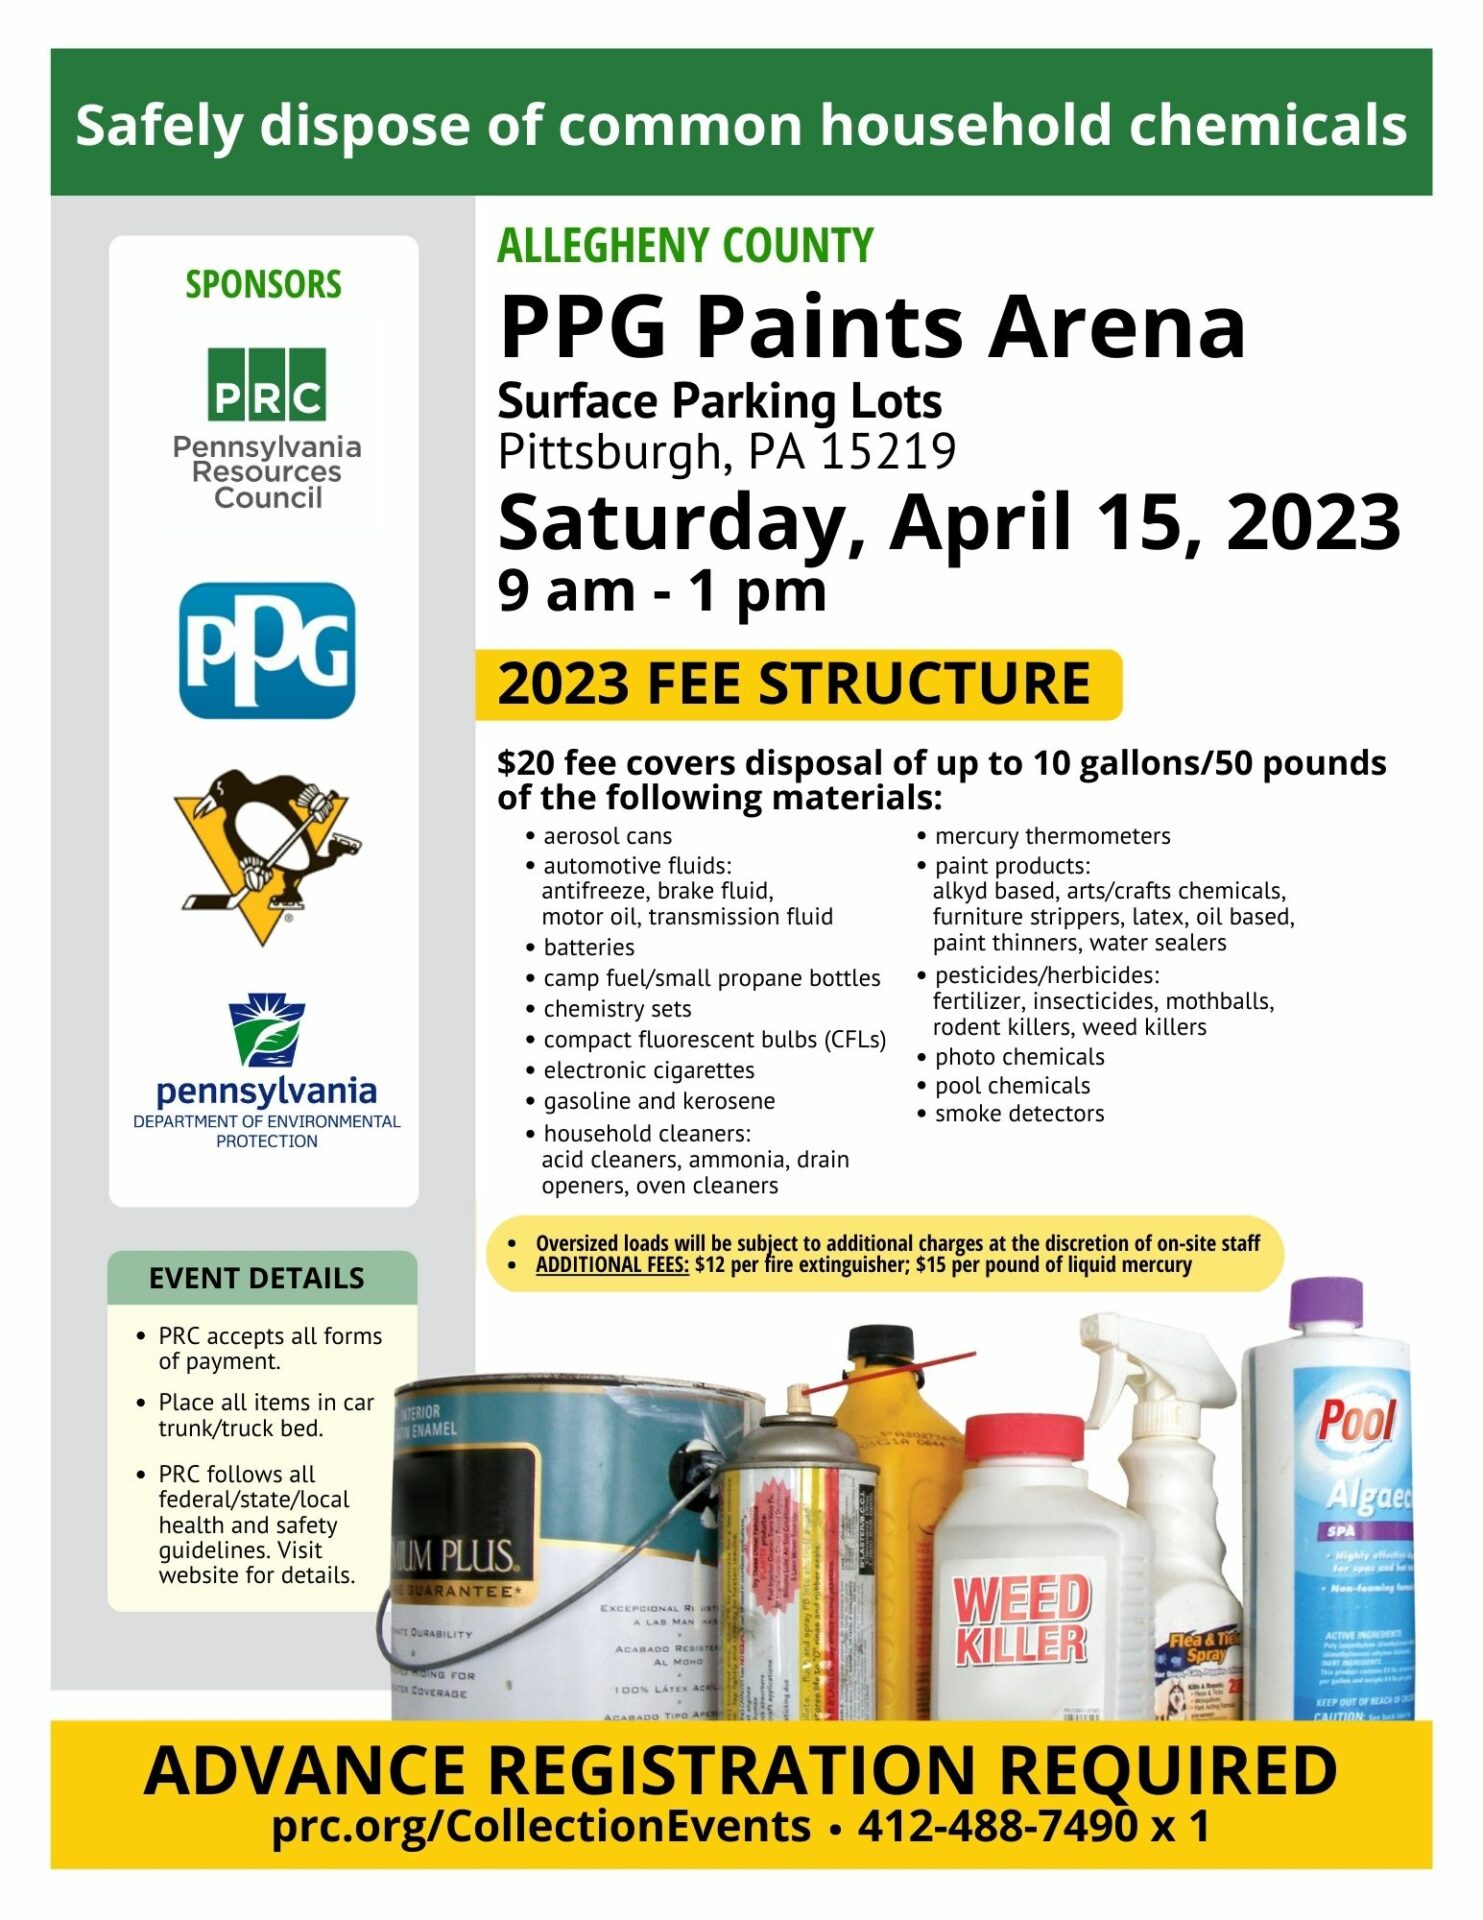 PPG Paints Arena: Reserve Parking in Pittsburgh, PA